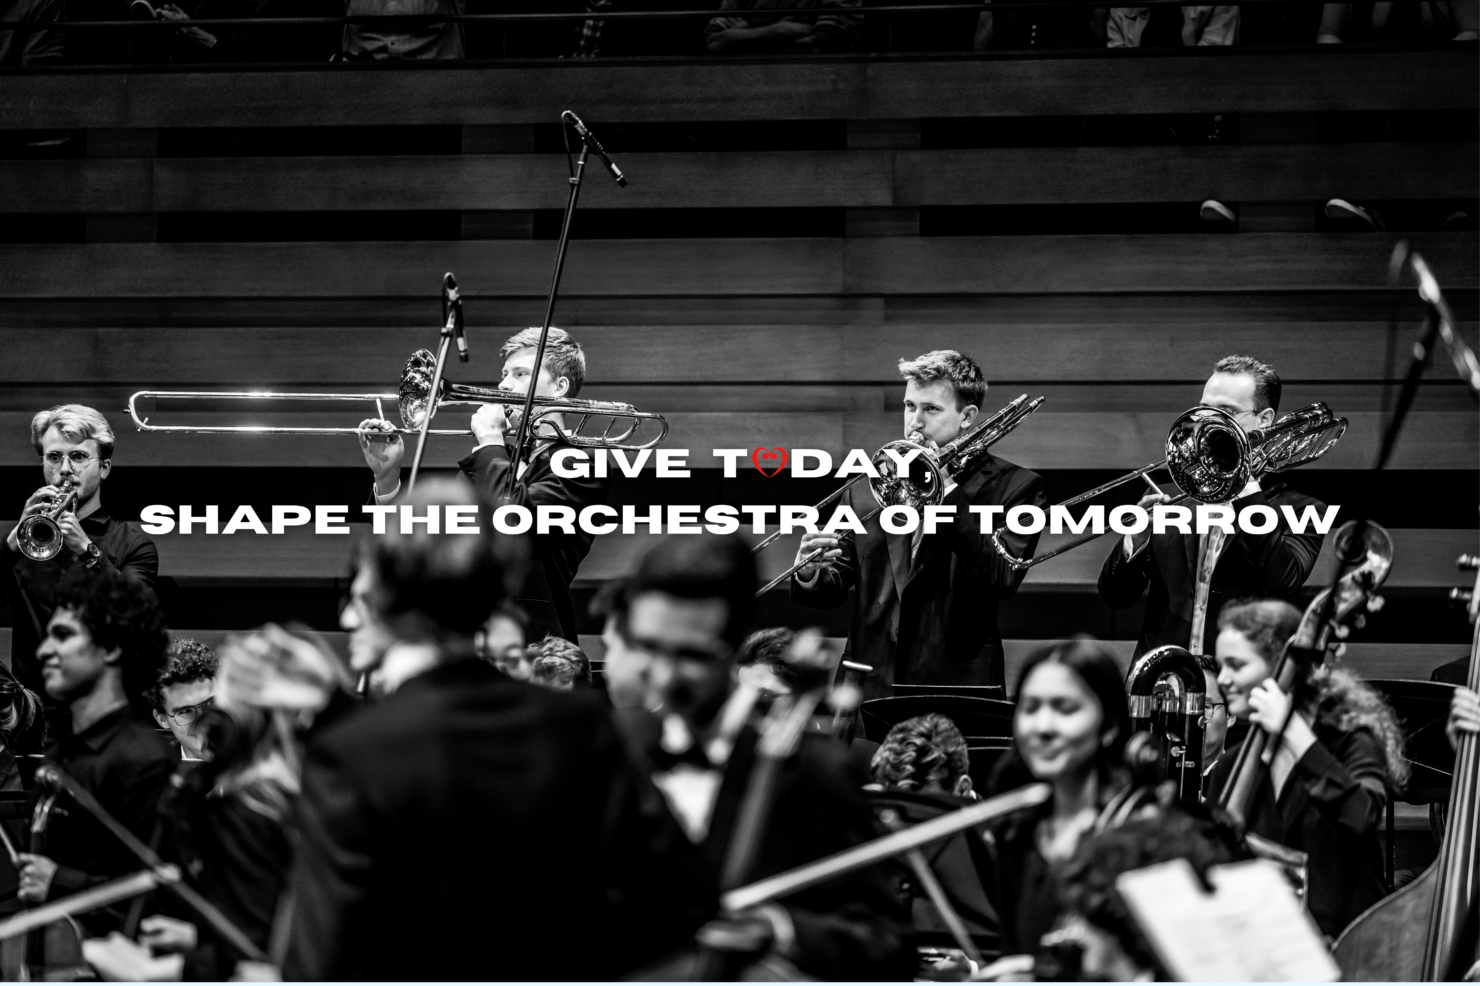 Give today shape the orchestra of tomorrow